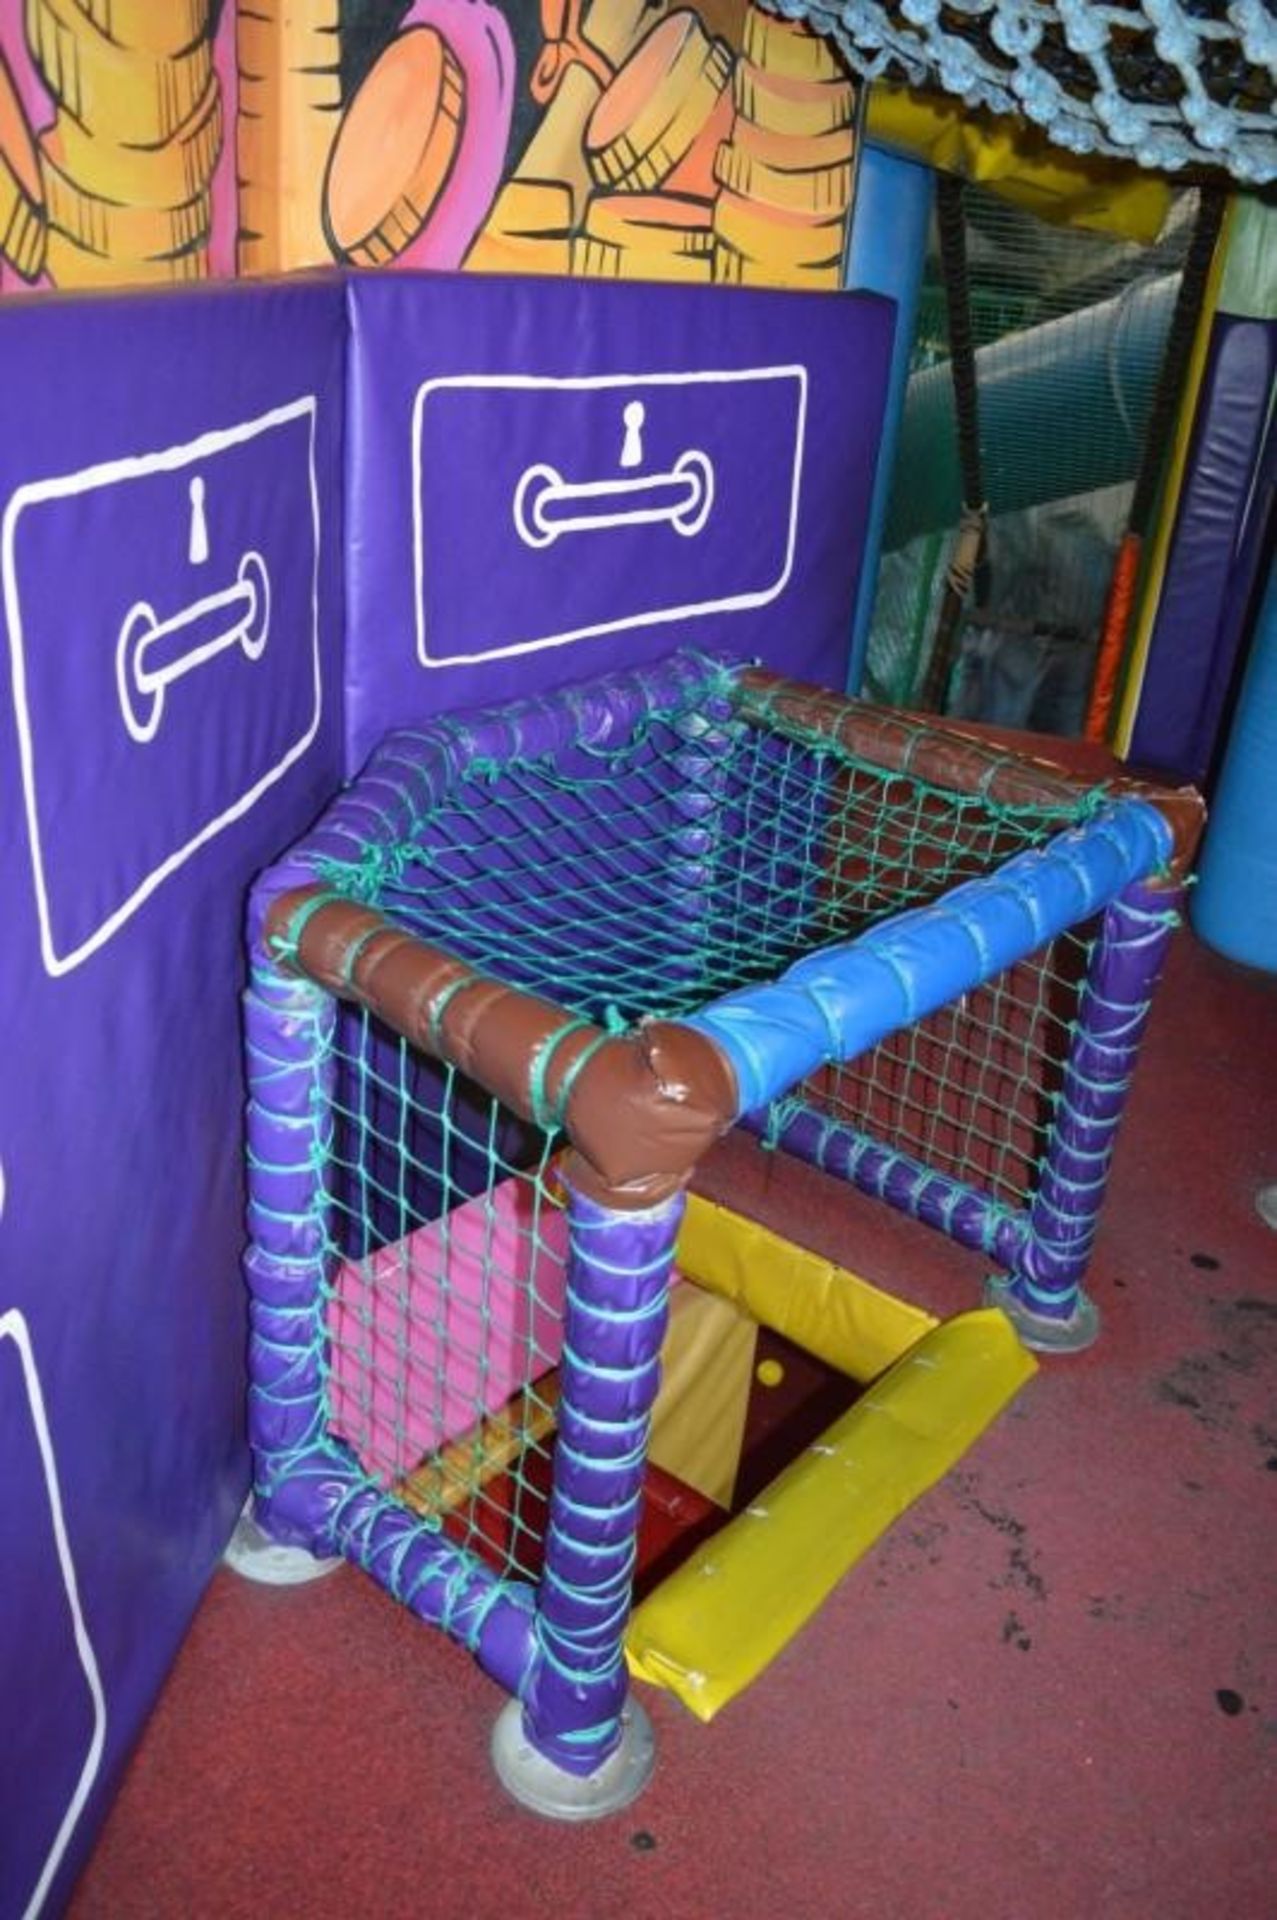 Botany Bay Puddletown Pirates Play Centre - The Only Pirate Themed Play Centre in the North West - F - Image 19 of 30